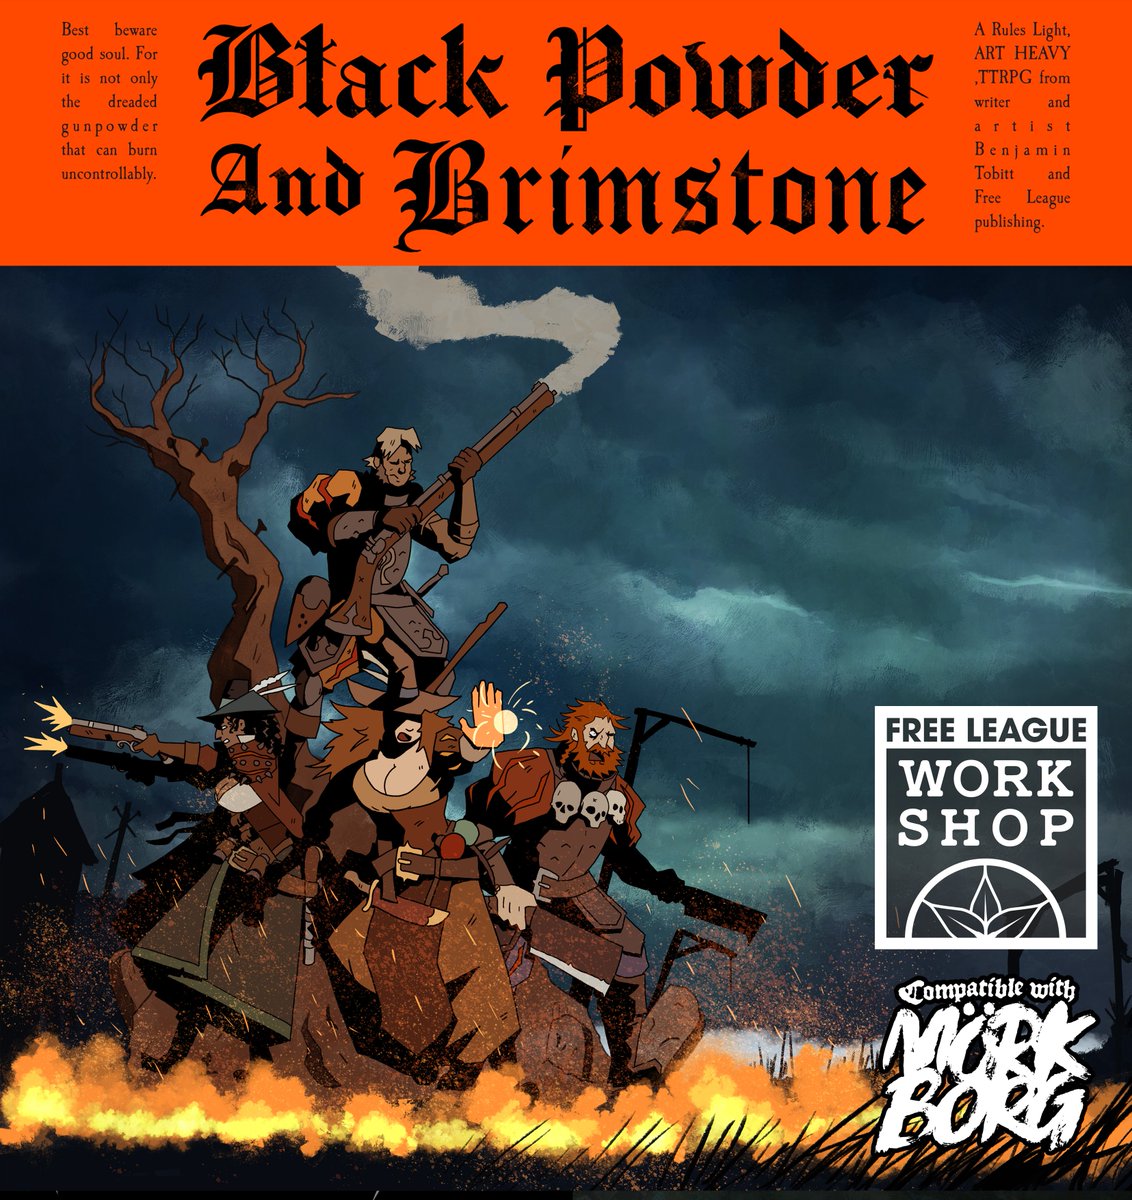 Back Black Powder nad Brimstone today! The newest TTRPG published by @FreeLeaguePub based on the award winning Mörk Borg system. 🔥🐦‍⬛💀⚔️💣 Step into a world of witchraft, zealotry and Gunpowder with the free quickstart guide. link below in the thread.